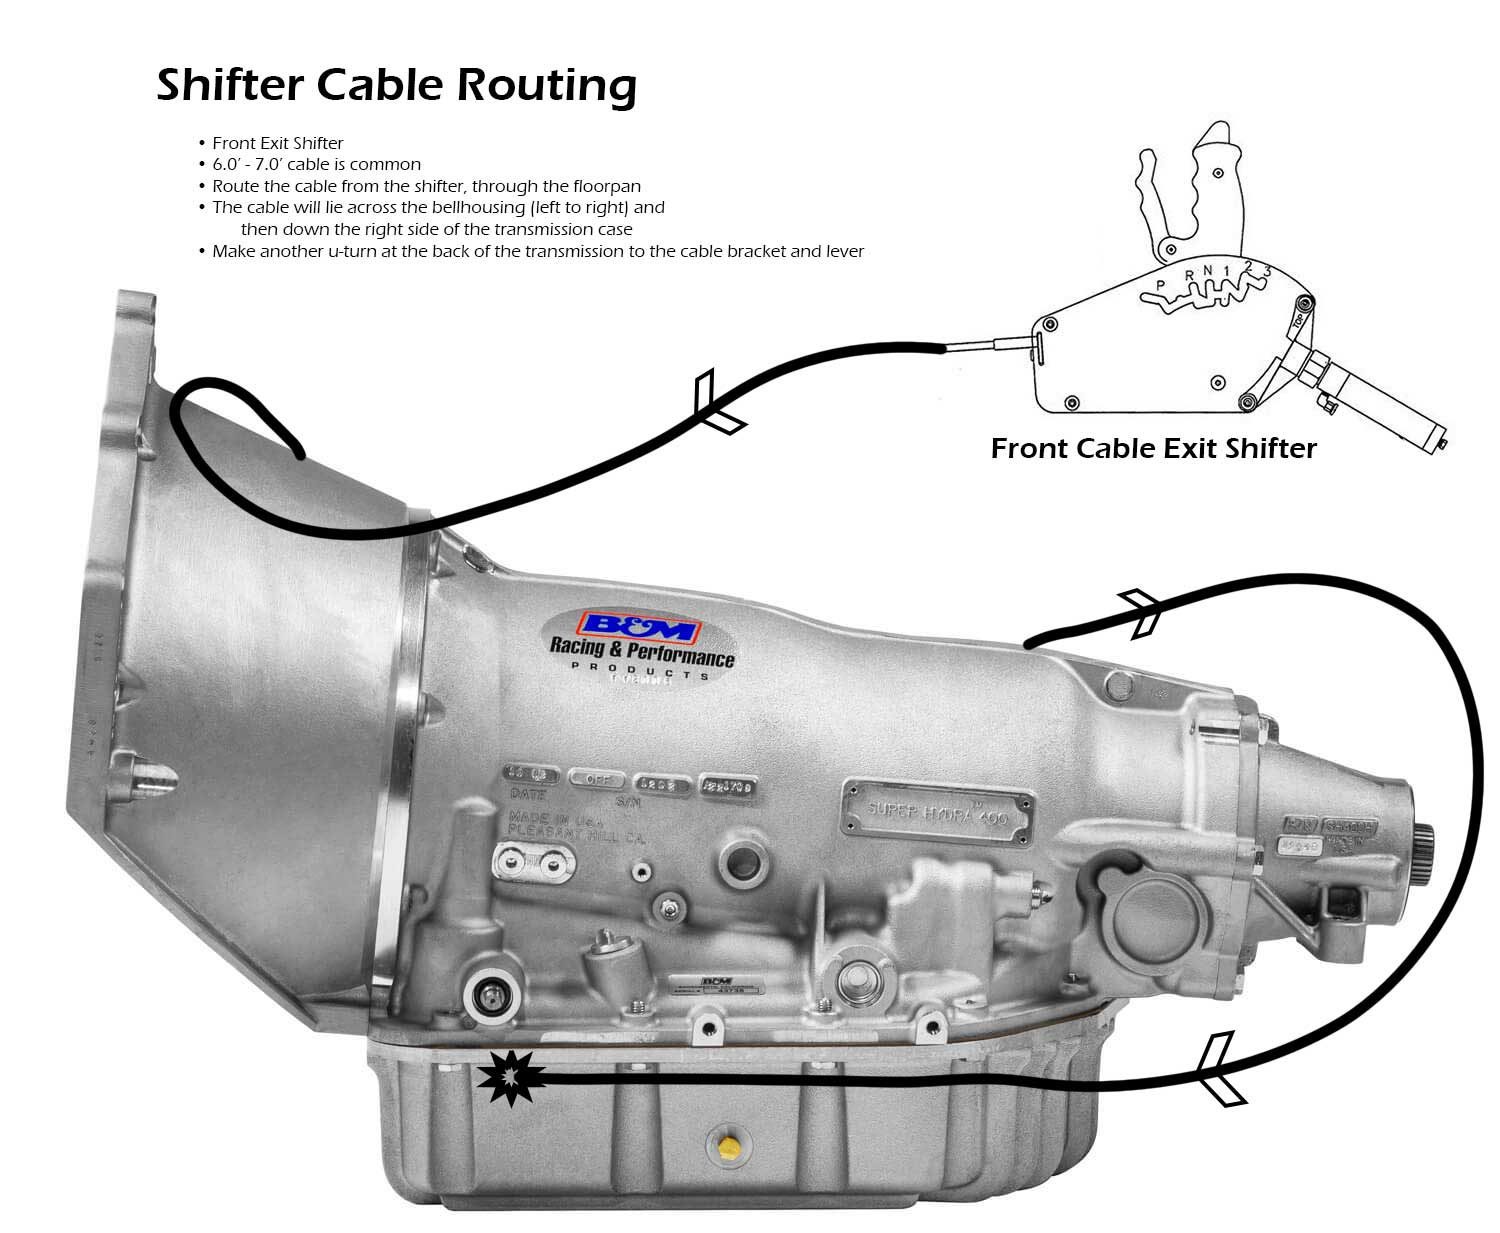 Shifter Cable Routing - Front Exit